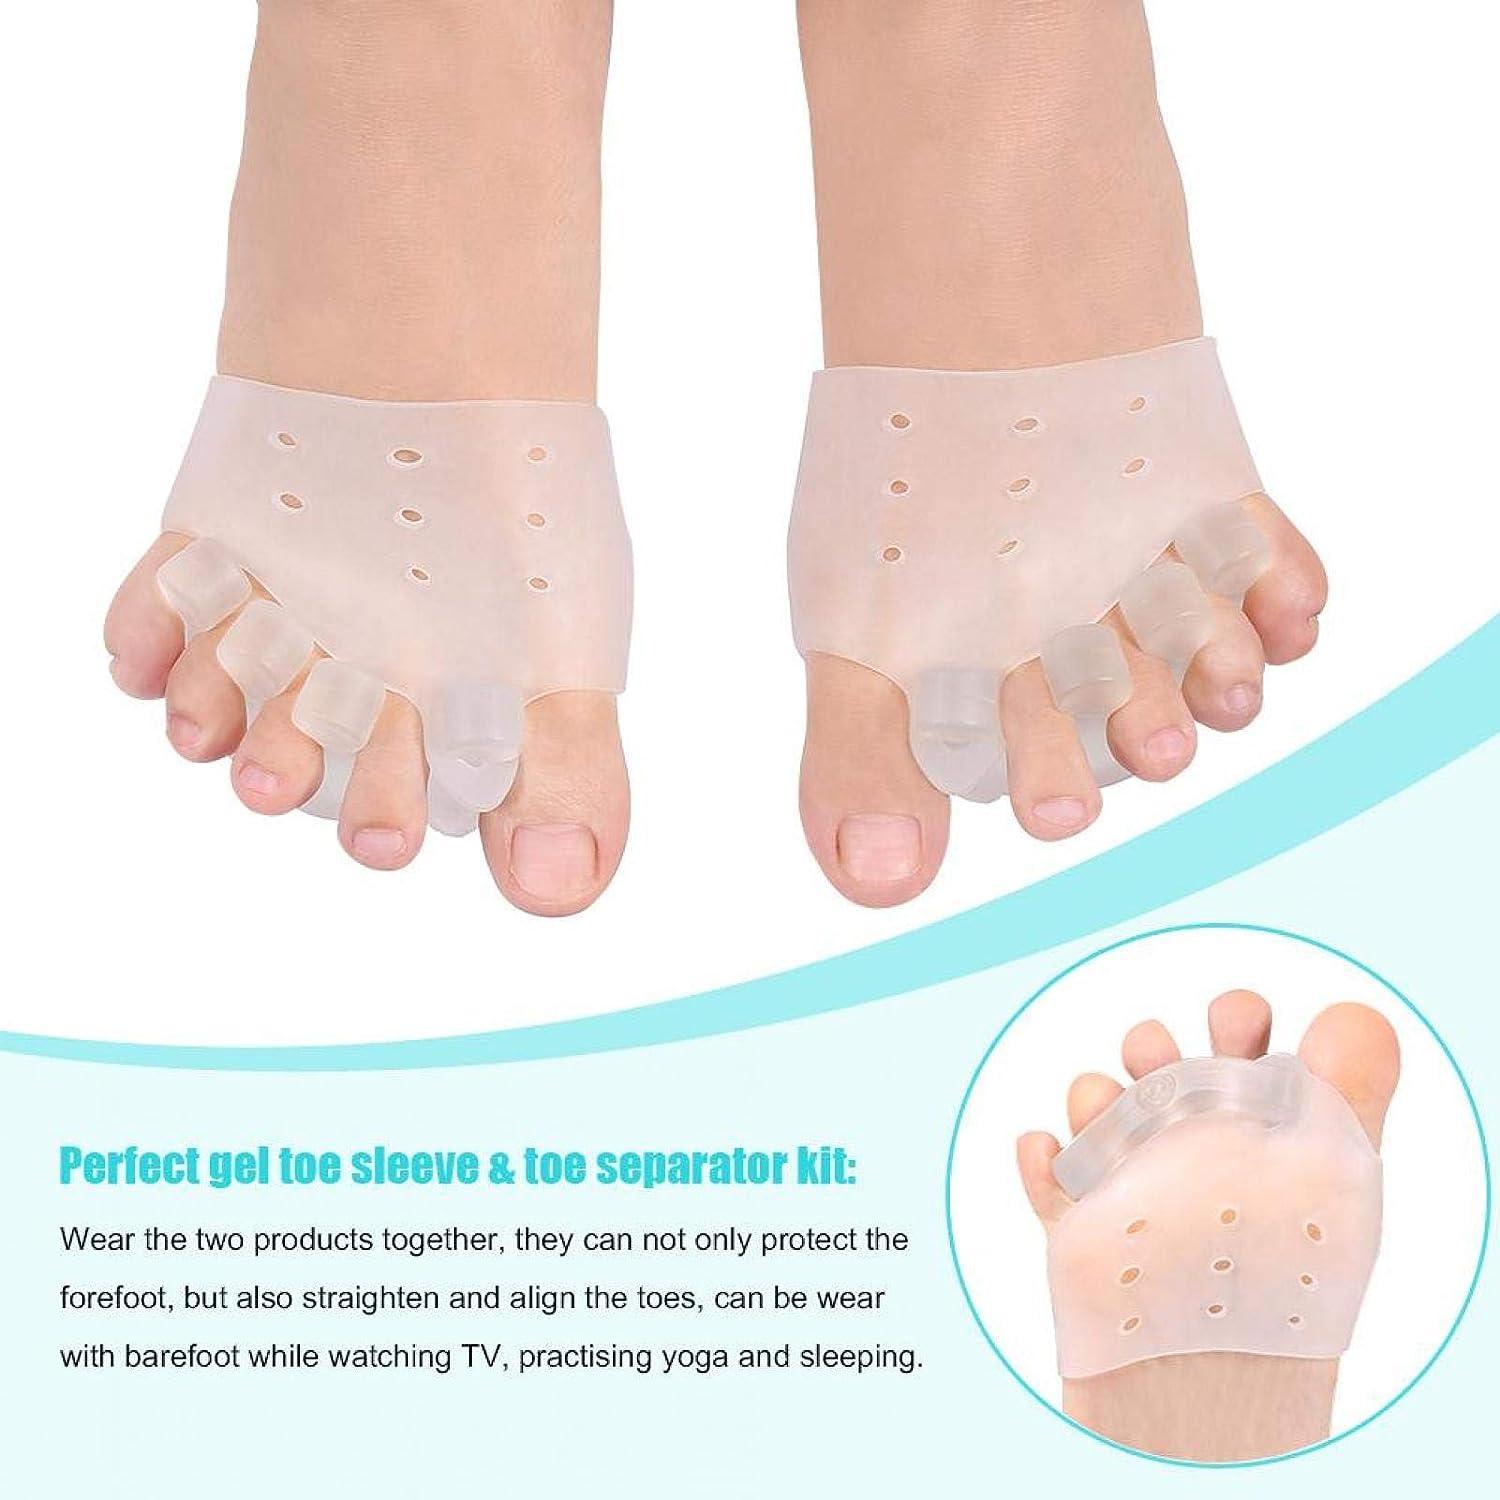 Toe Separator Silicone Toe Pads for Therapeutic Relief from